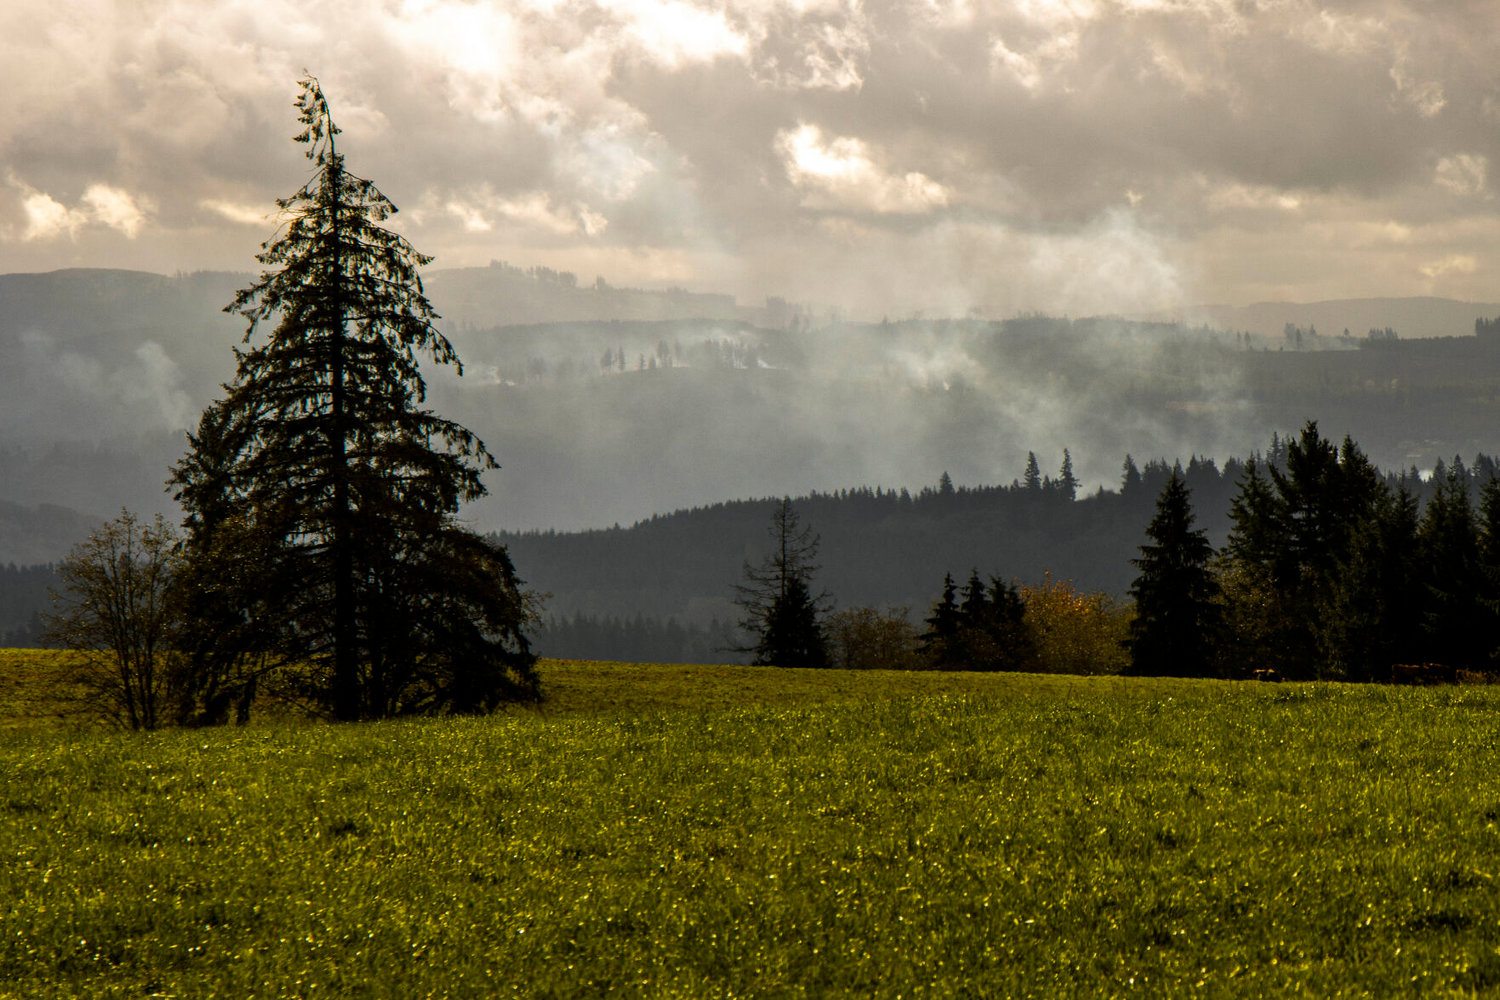 Grass and trees grow on a plot of land near Fire Mountain Farms Inc. in Onalaska in this October 2020 file photo.